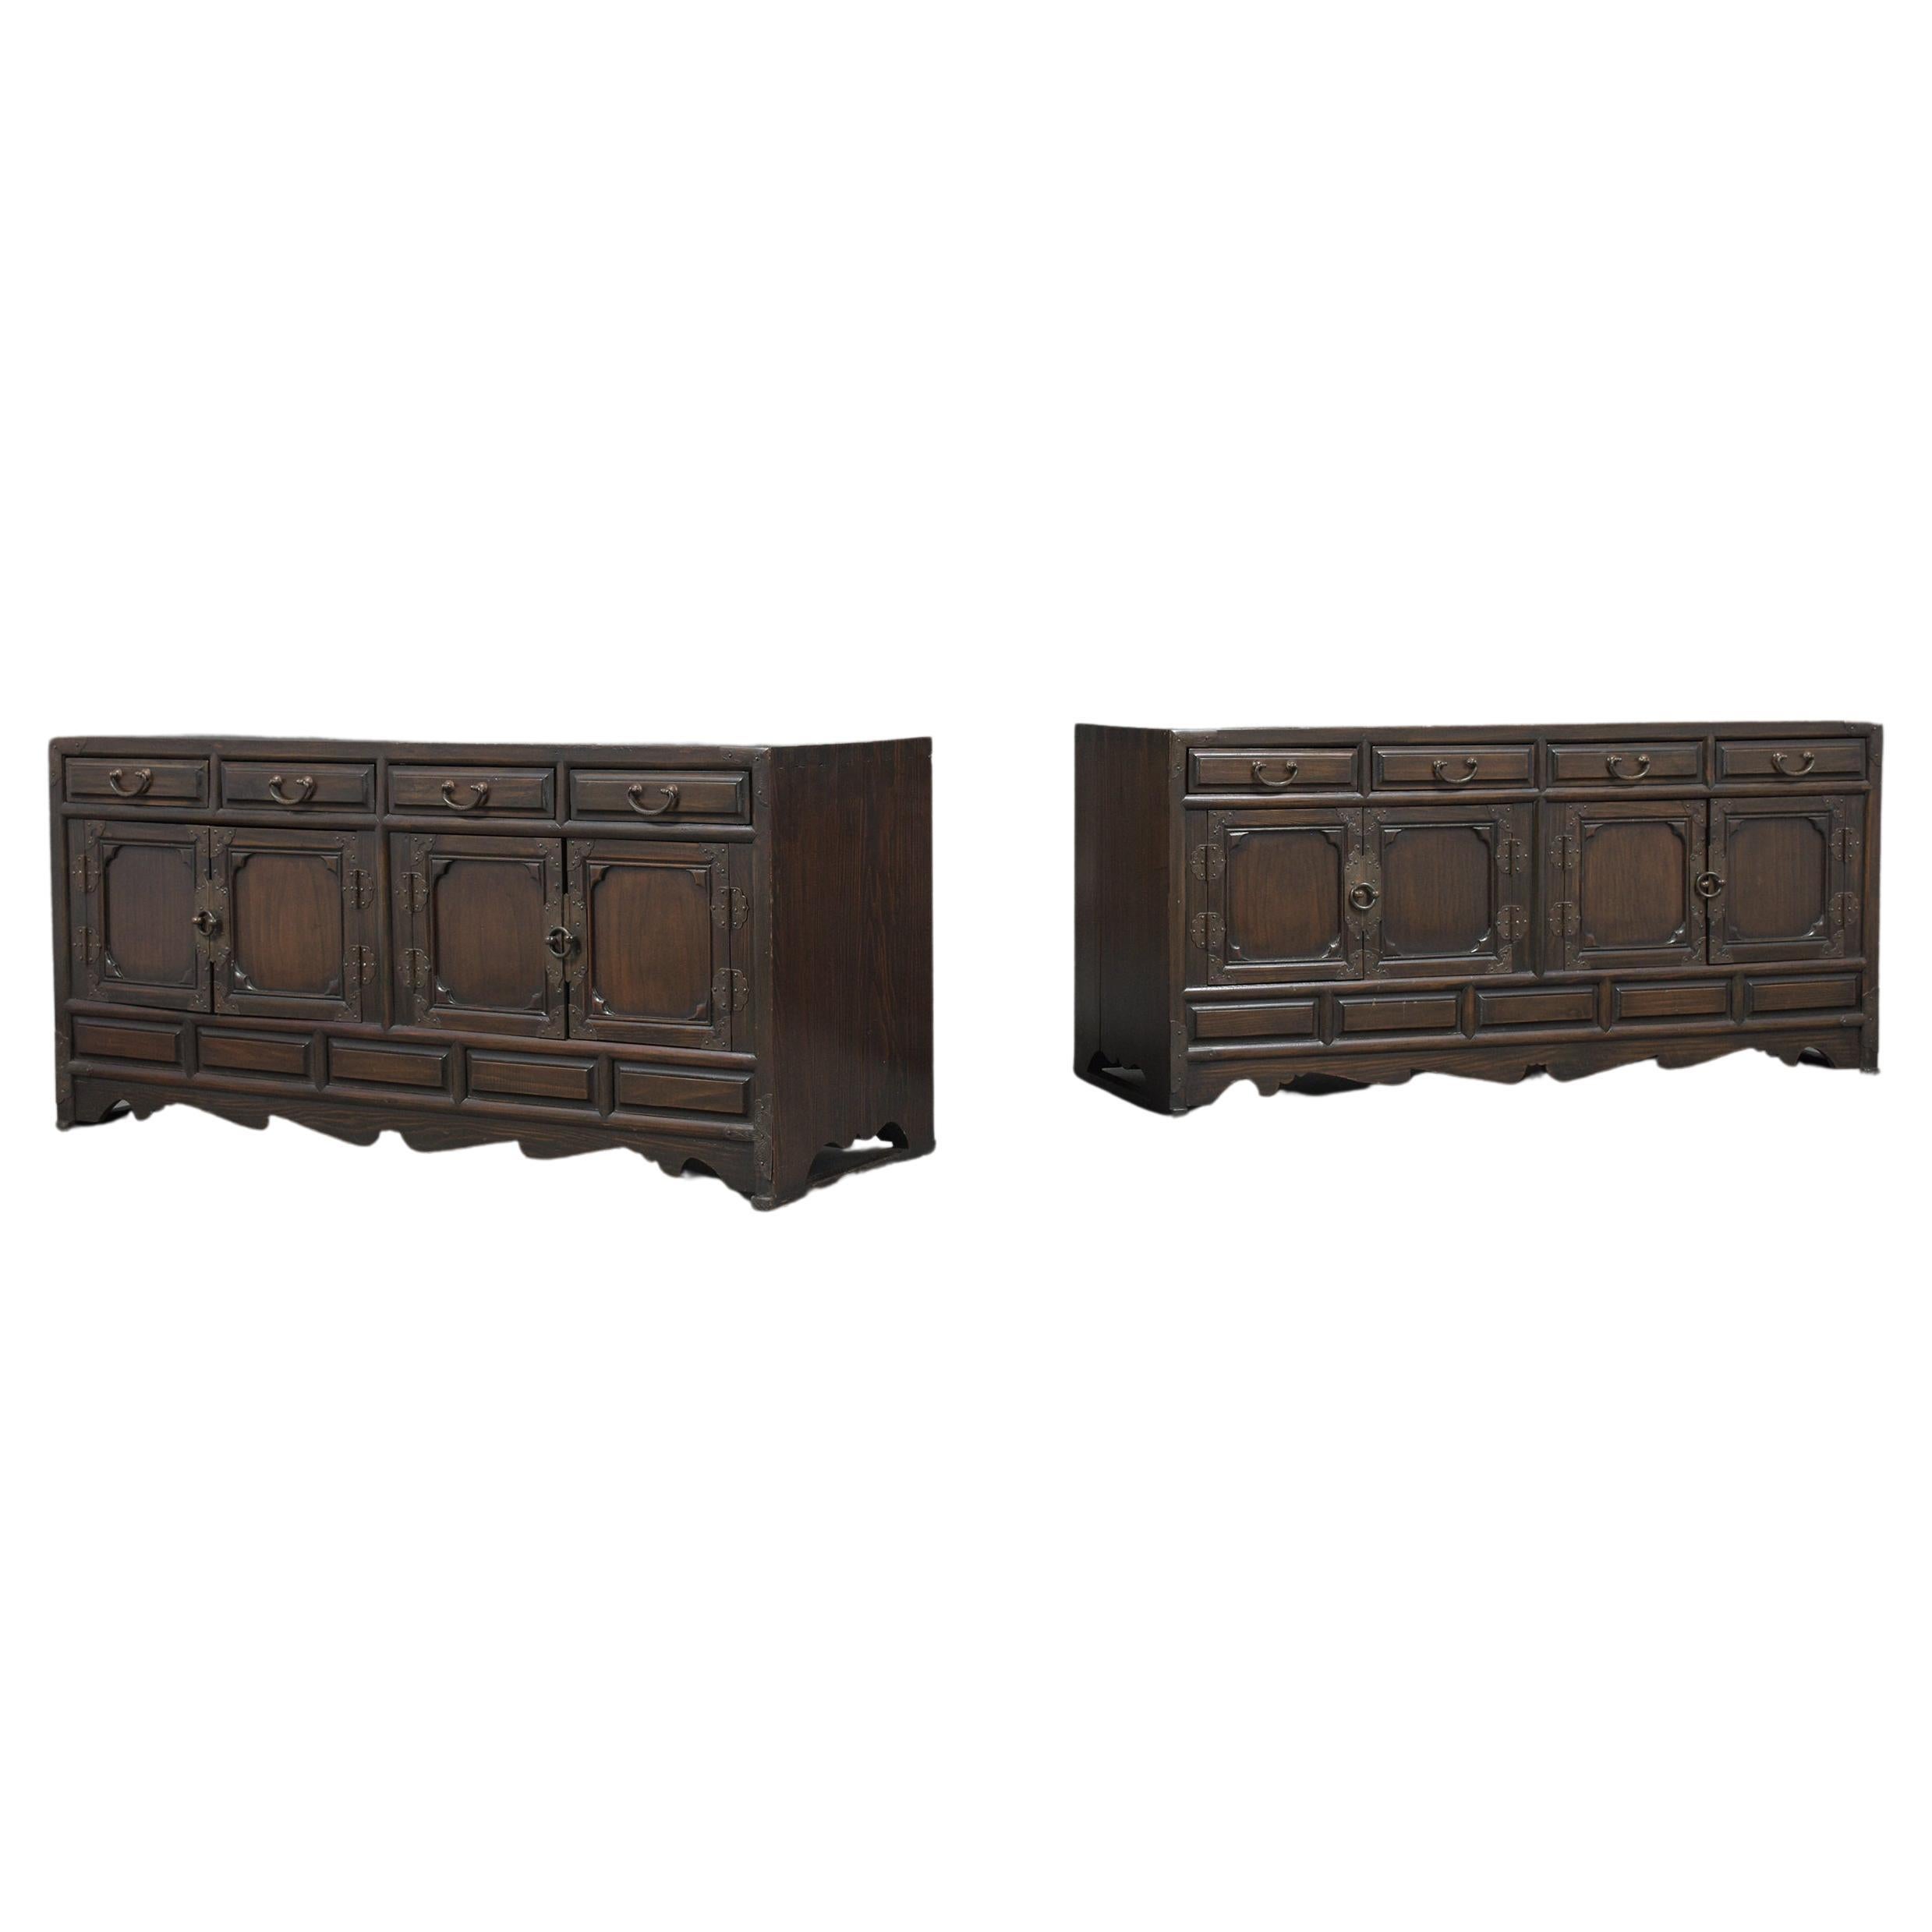 Two Korean Cabinets